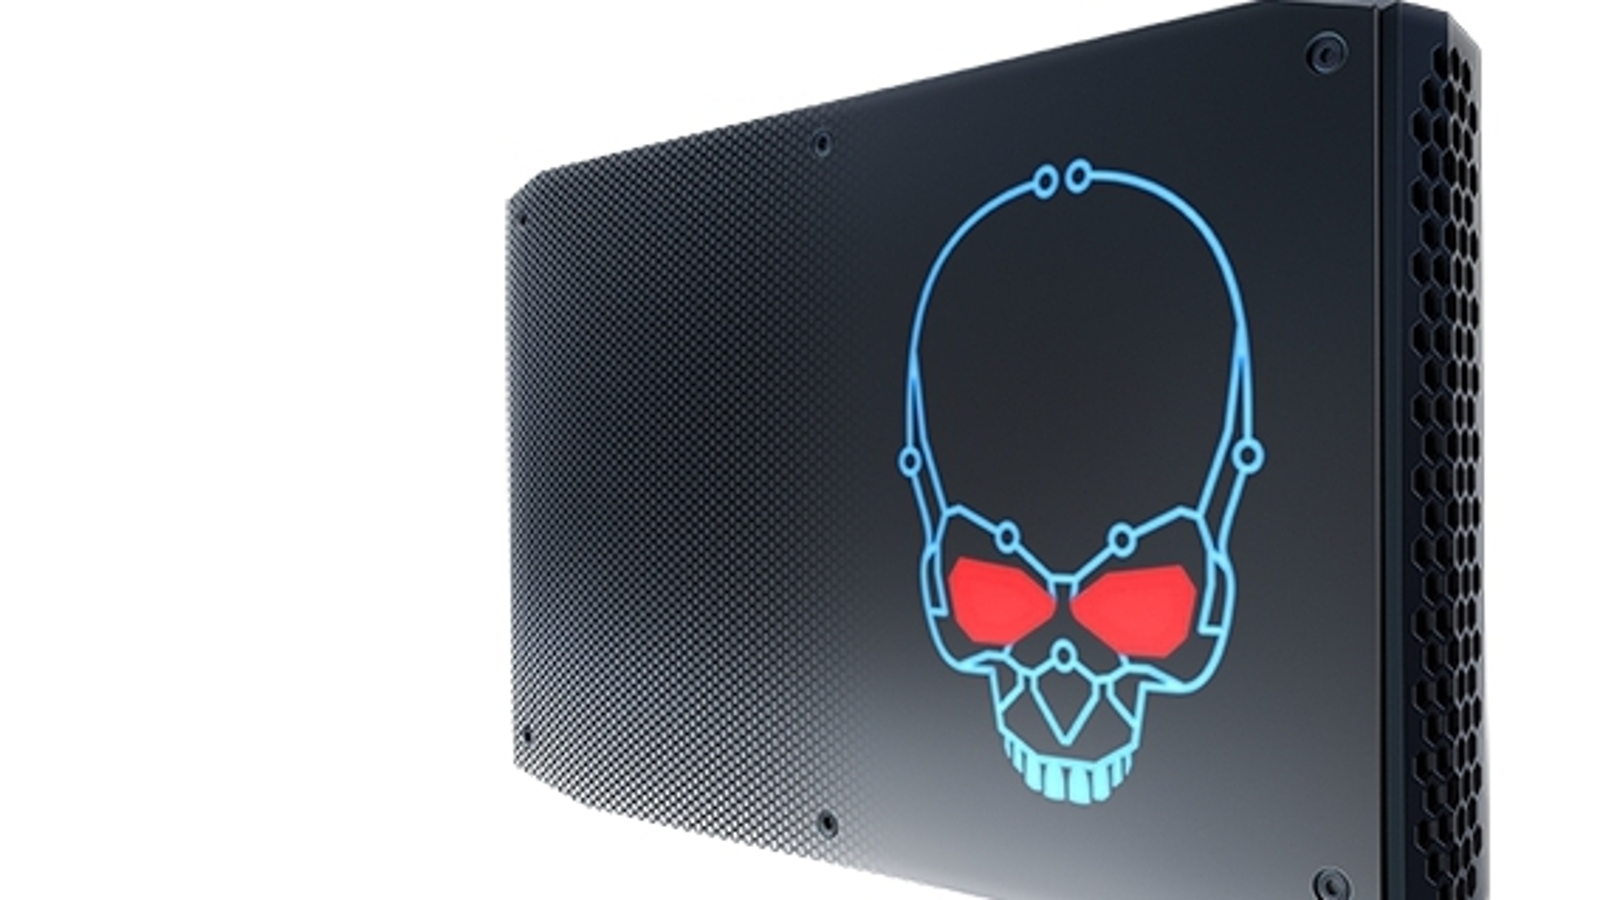 fly tempereret pige Intel Hades Canyon NUC8i7HVK review: how powerful is the i7/Radeon Vega  combo? | Eurogamer.net